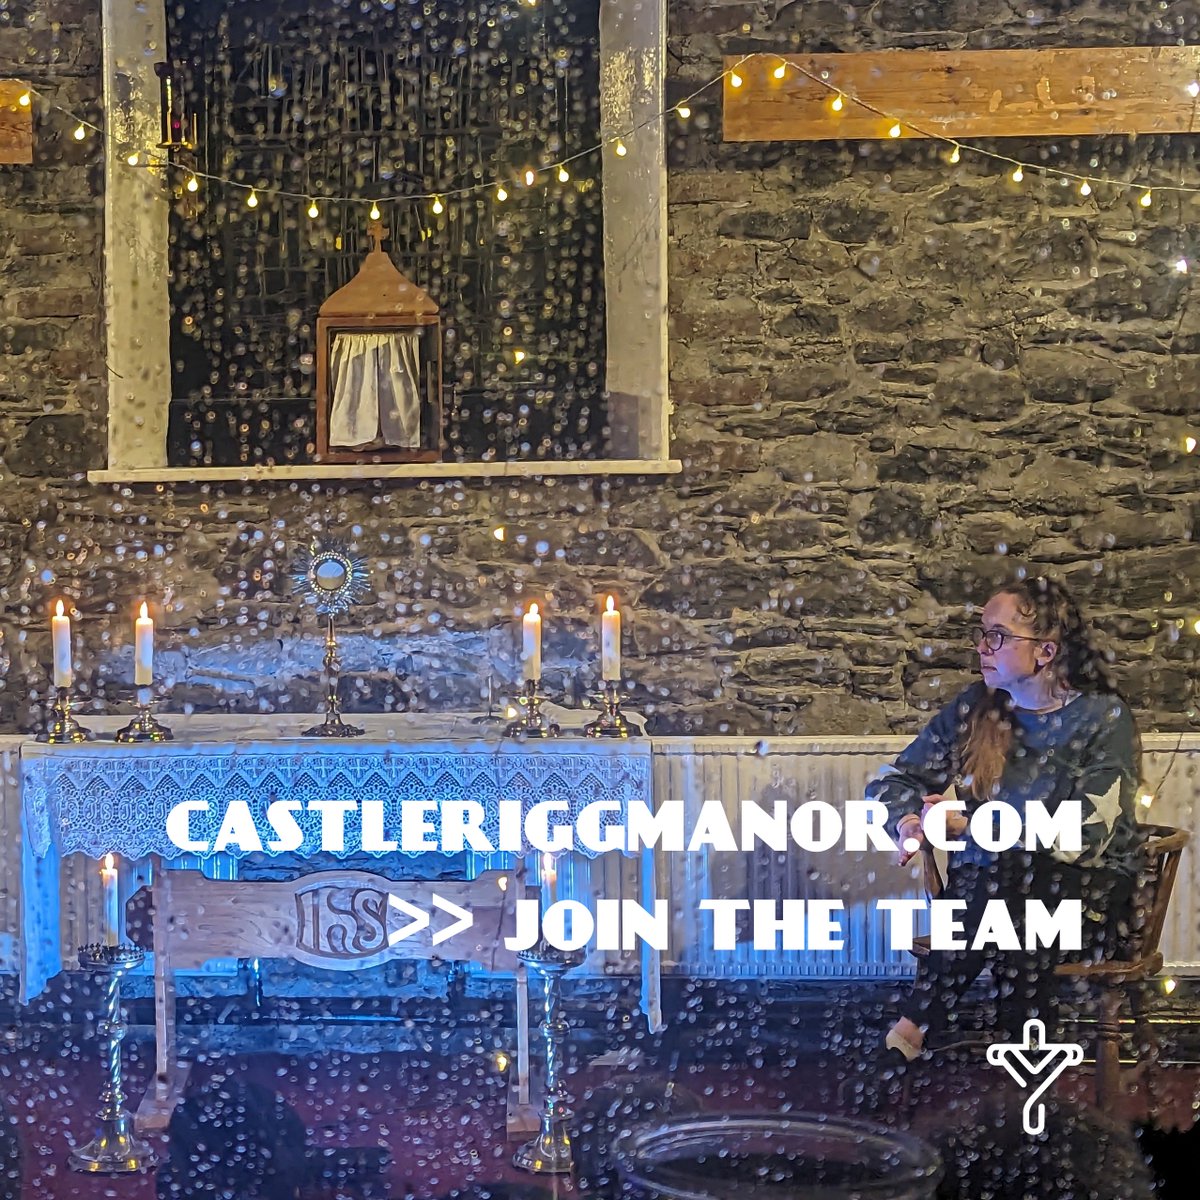 Looking for an adventure next year? Why not join the Castlerigg team as a Youth Ministry Intern. You'll get a room, food, pocket money and some excellent training, experience and qualifications as well as an awesome year with a brilliant group of people! castleriggmanor.com/join-the-team/